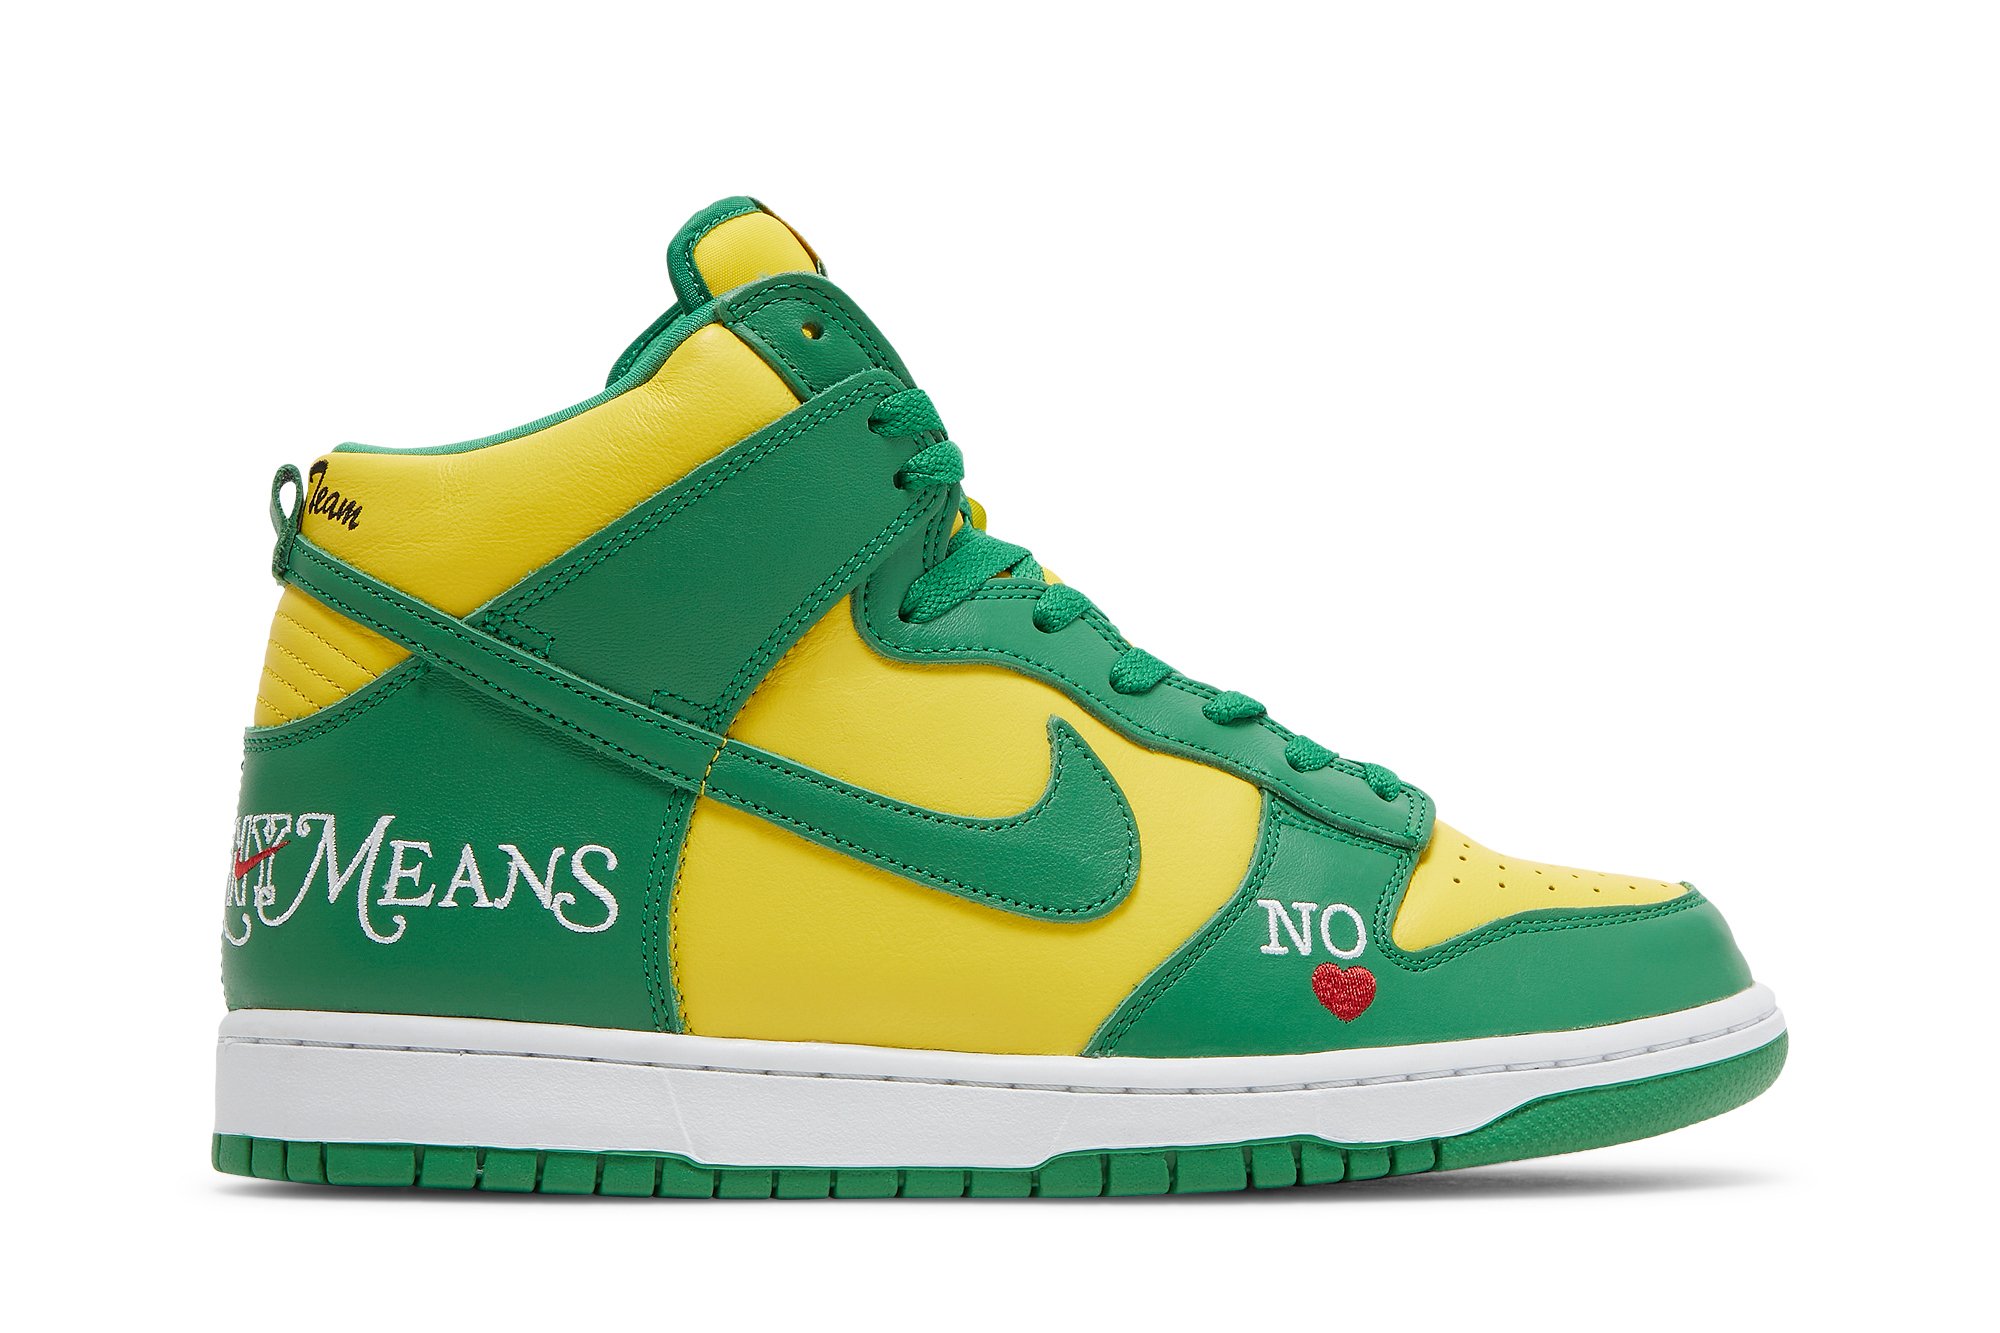 Supreme x Dunk High SB 'By Any Means - Brazil' | GOAT